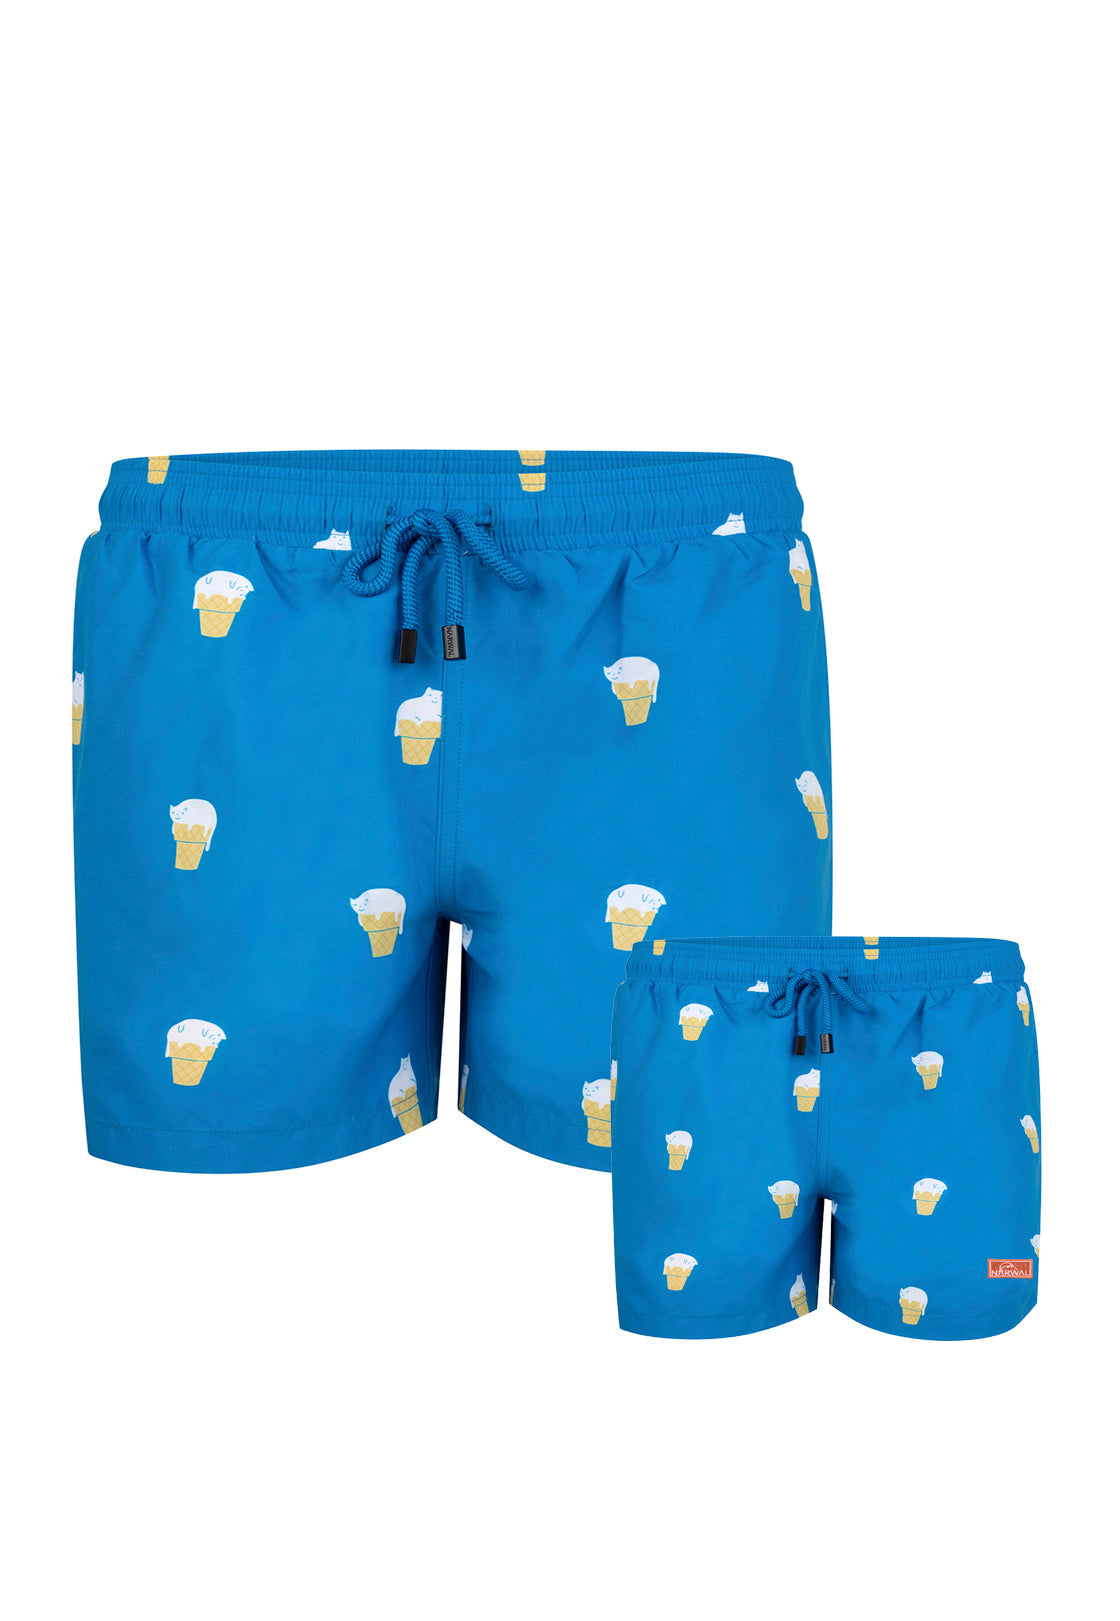 Cold as Mice Vader & Zoon Swim Trunks Bundle